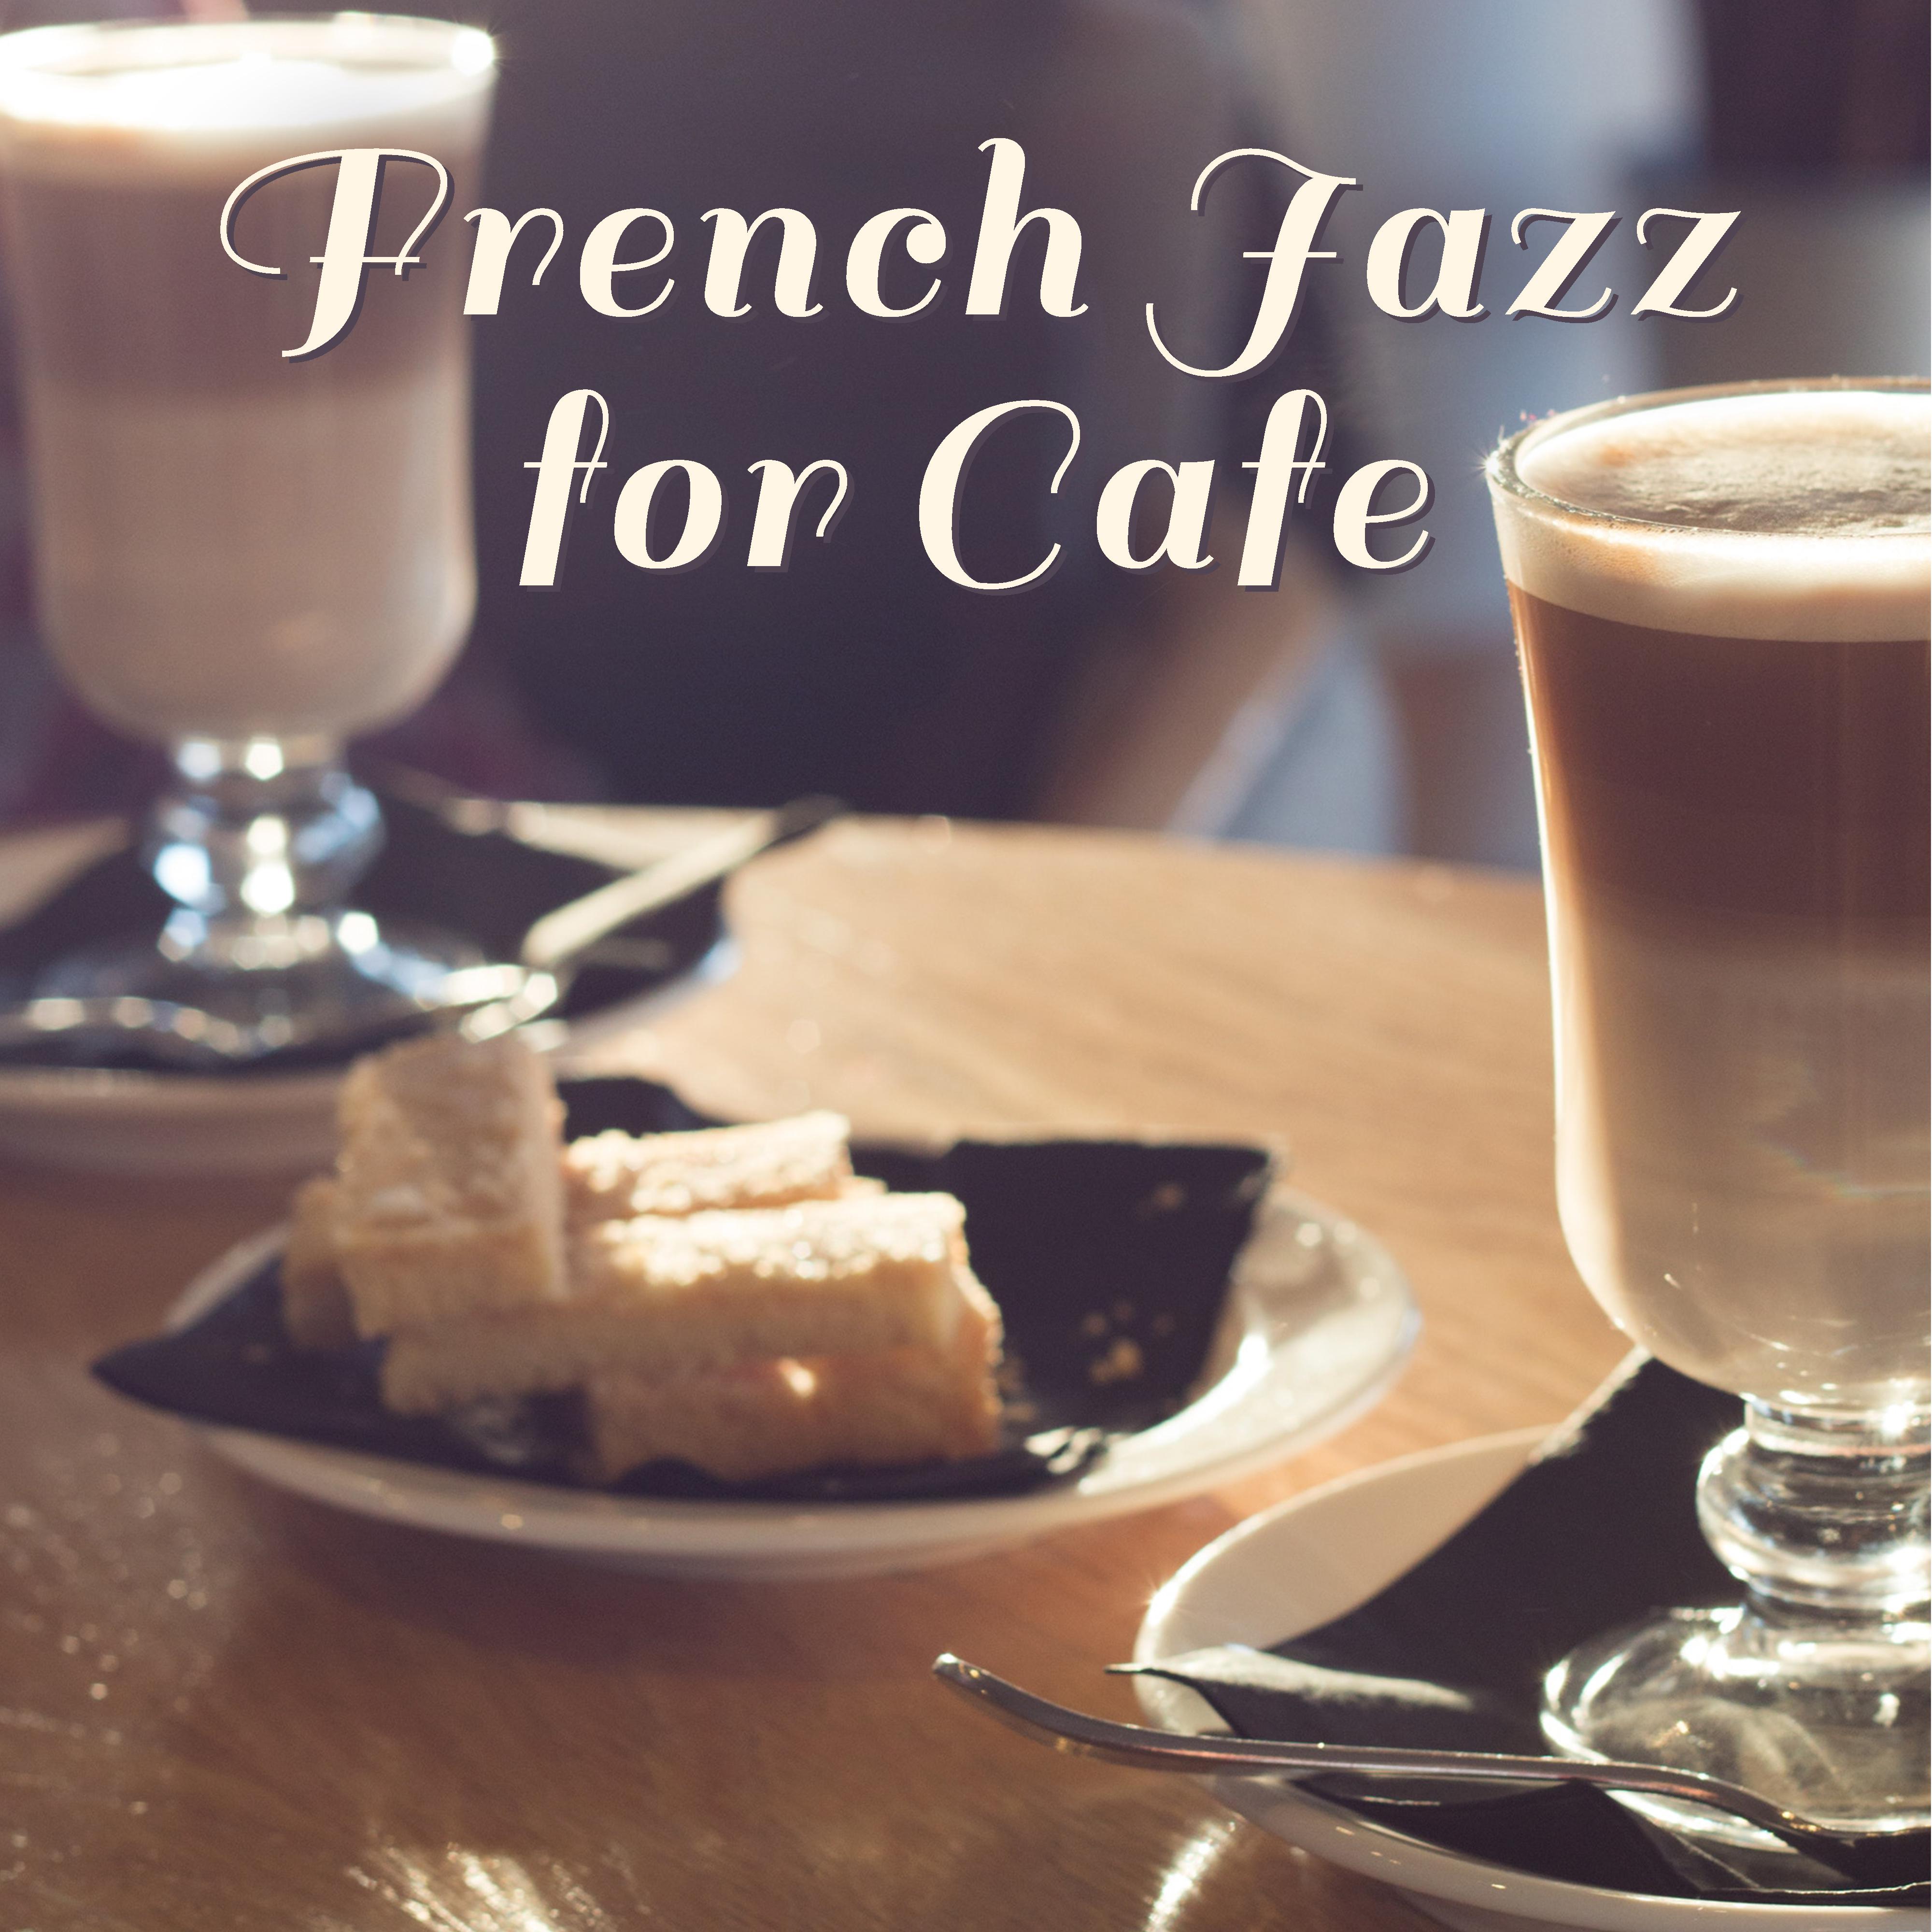 French Jazz for Cafe  Ambient Jazz, Romantic Music, Cafe Background, Lounge 2017